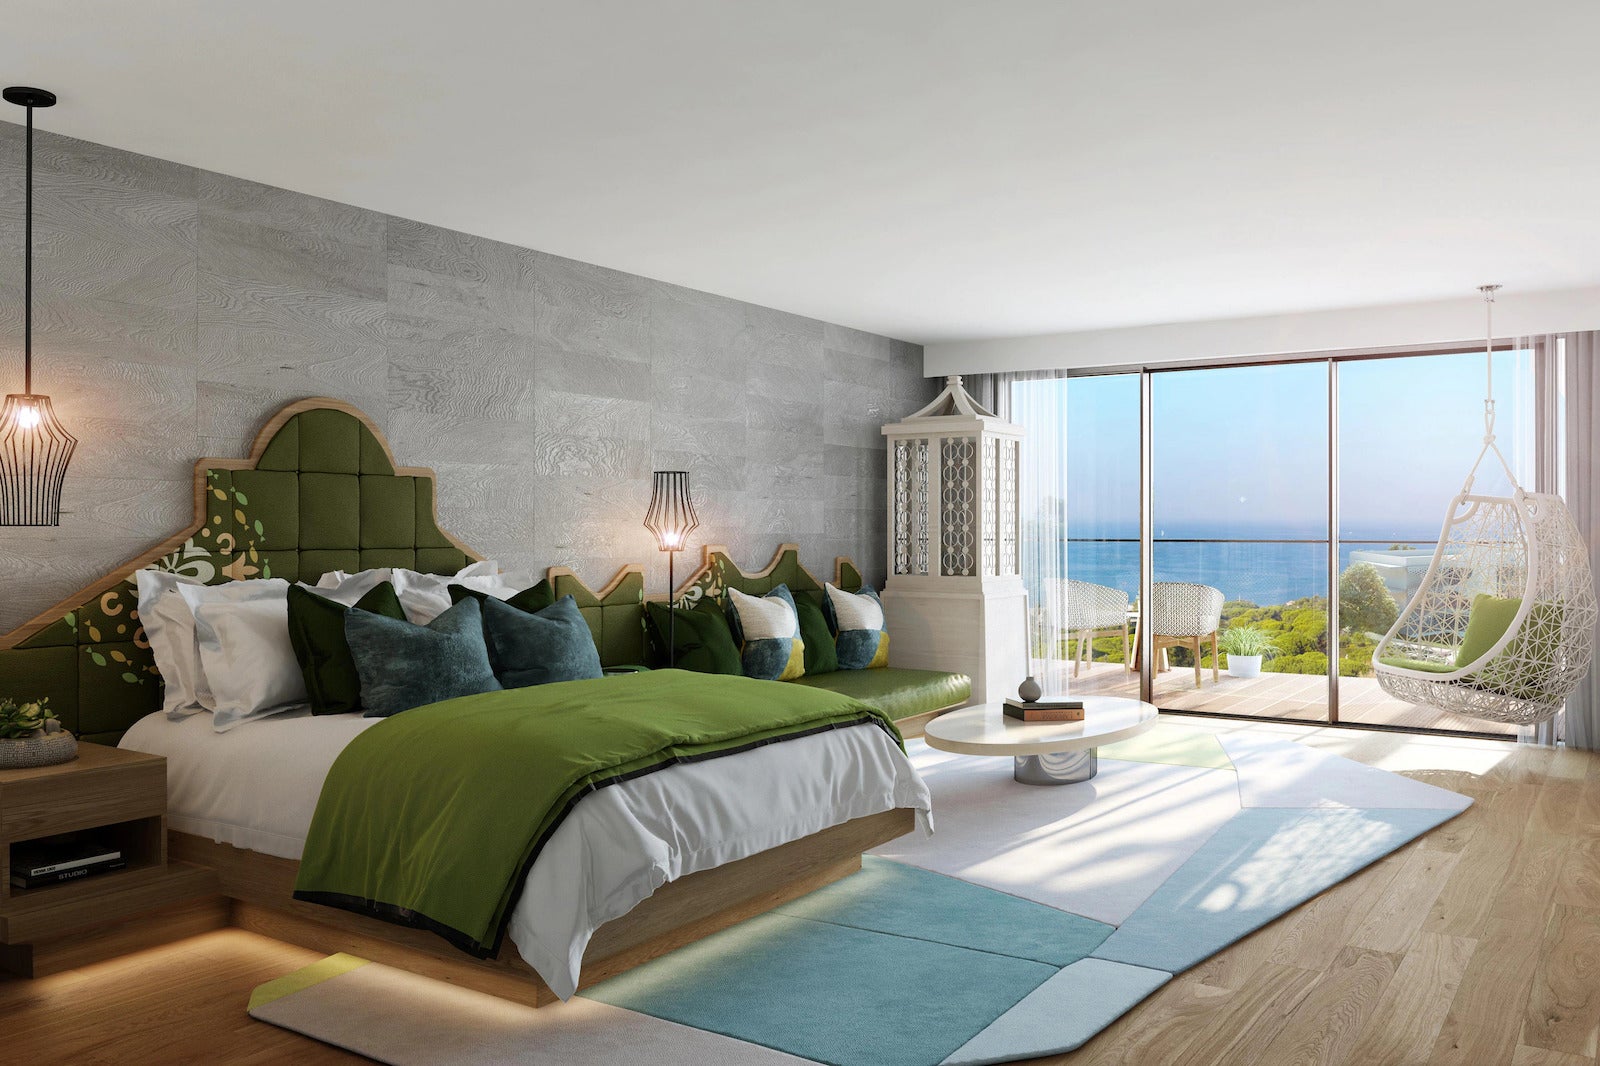 Large open hotel room with bed and green couch looking out at ocean